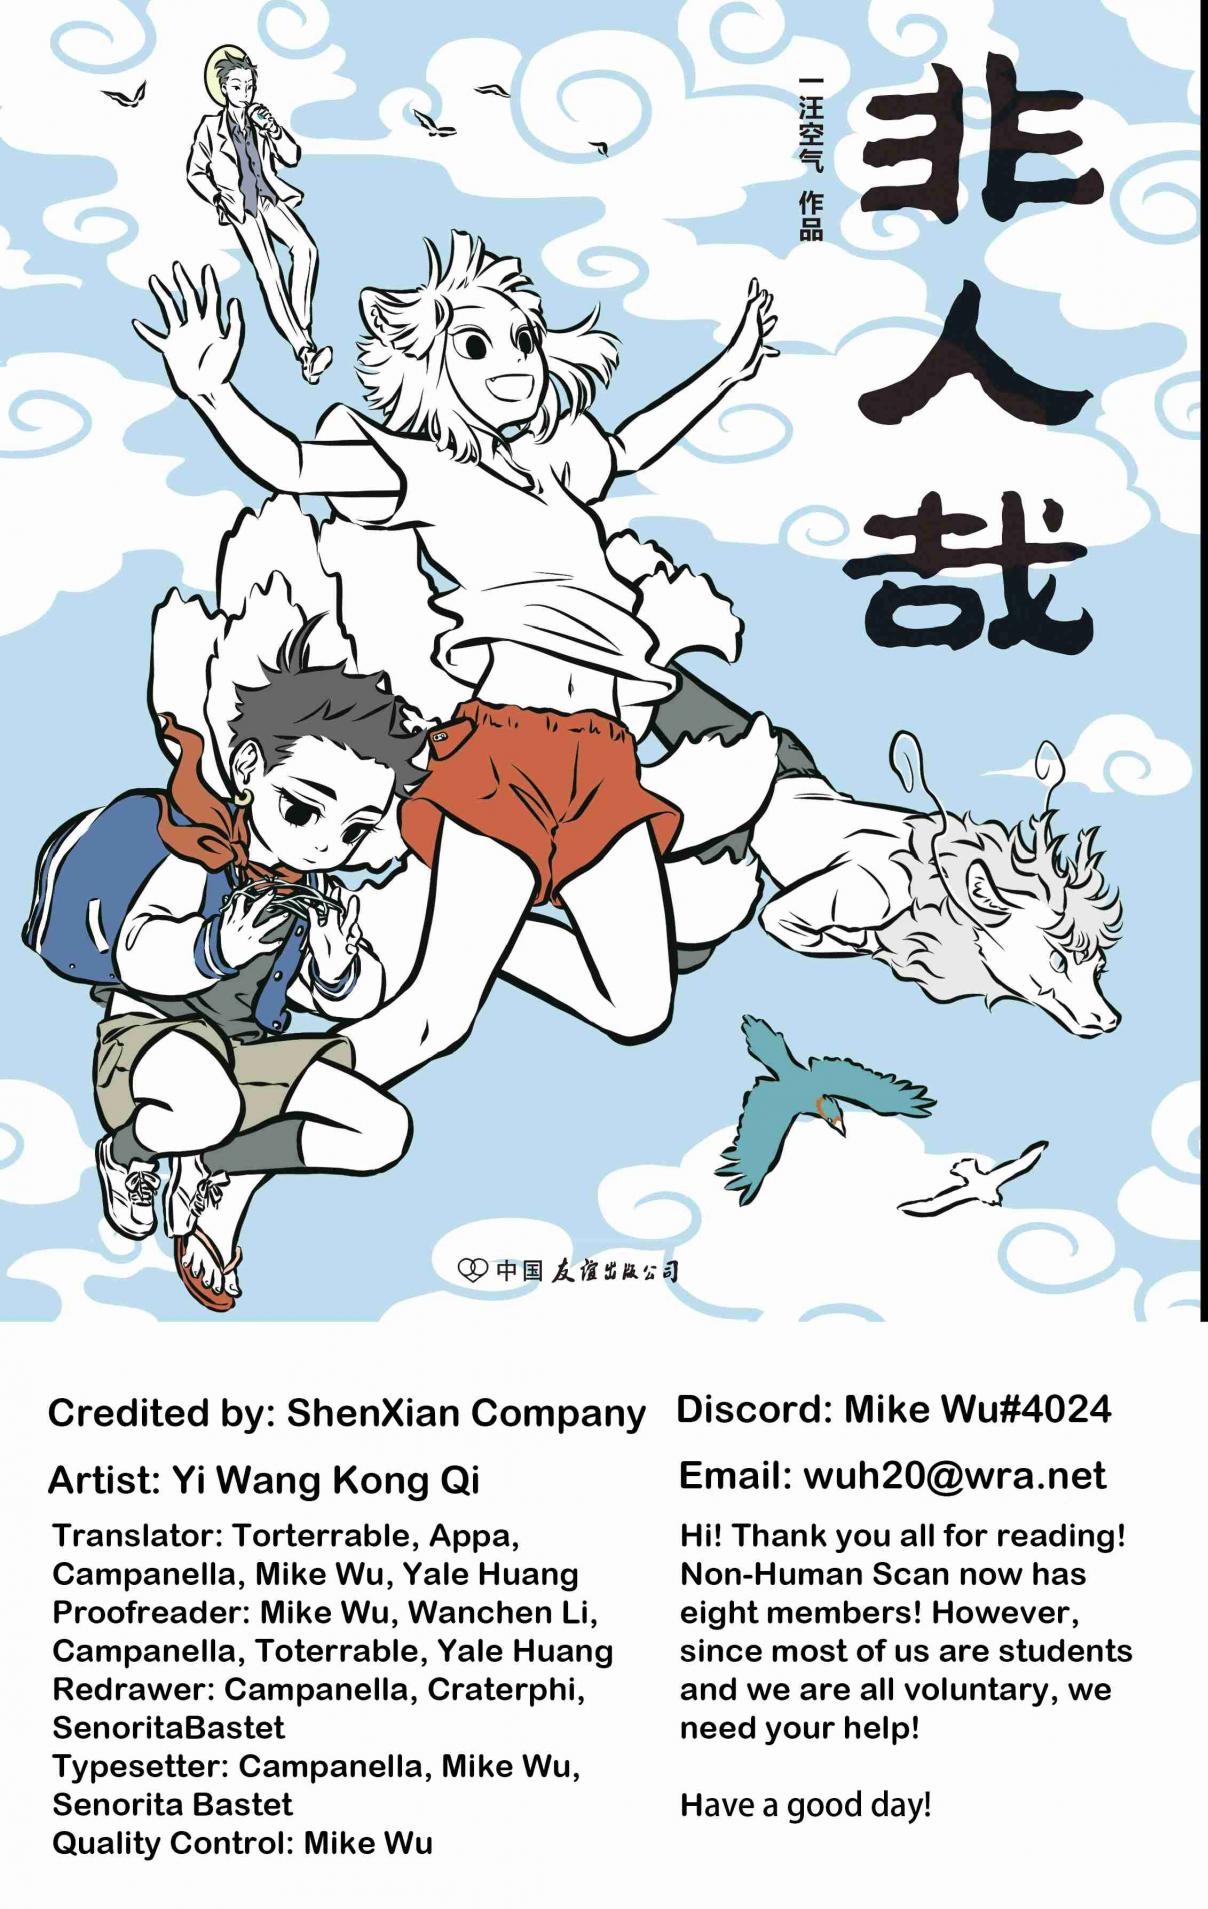 Fei Ren Zai Ch. 67 Be Kind to the Extincting Animal Nian, No Fireworks in front of Him